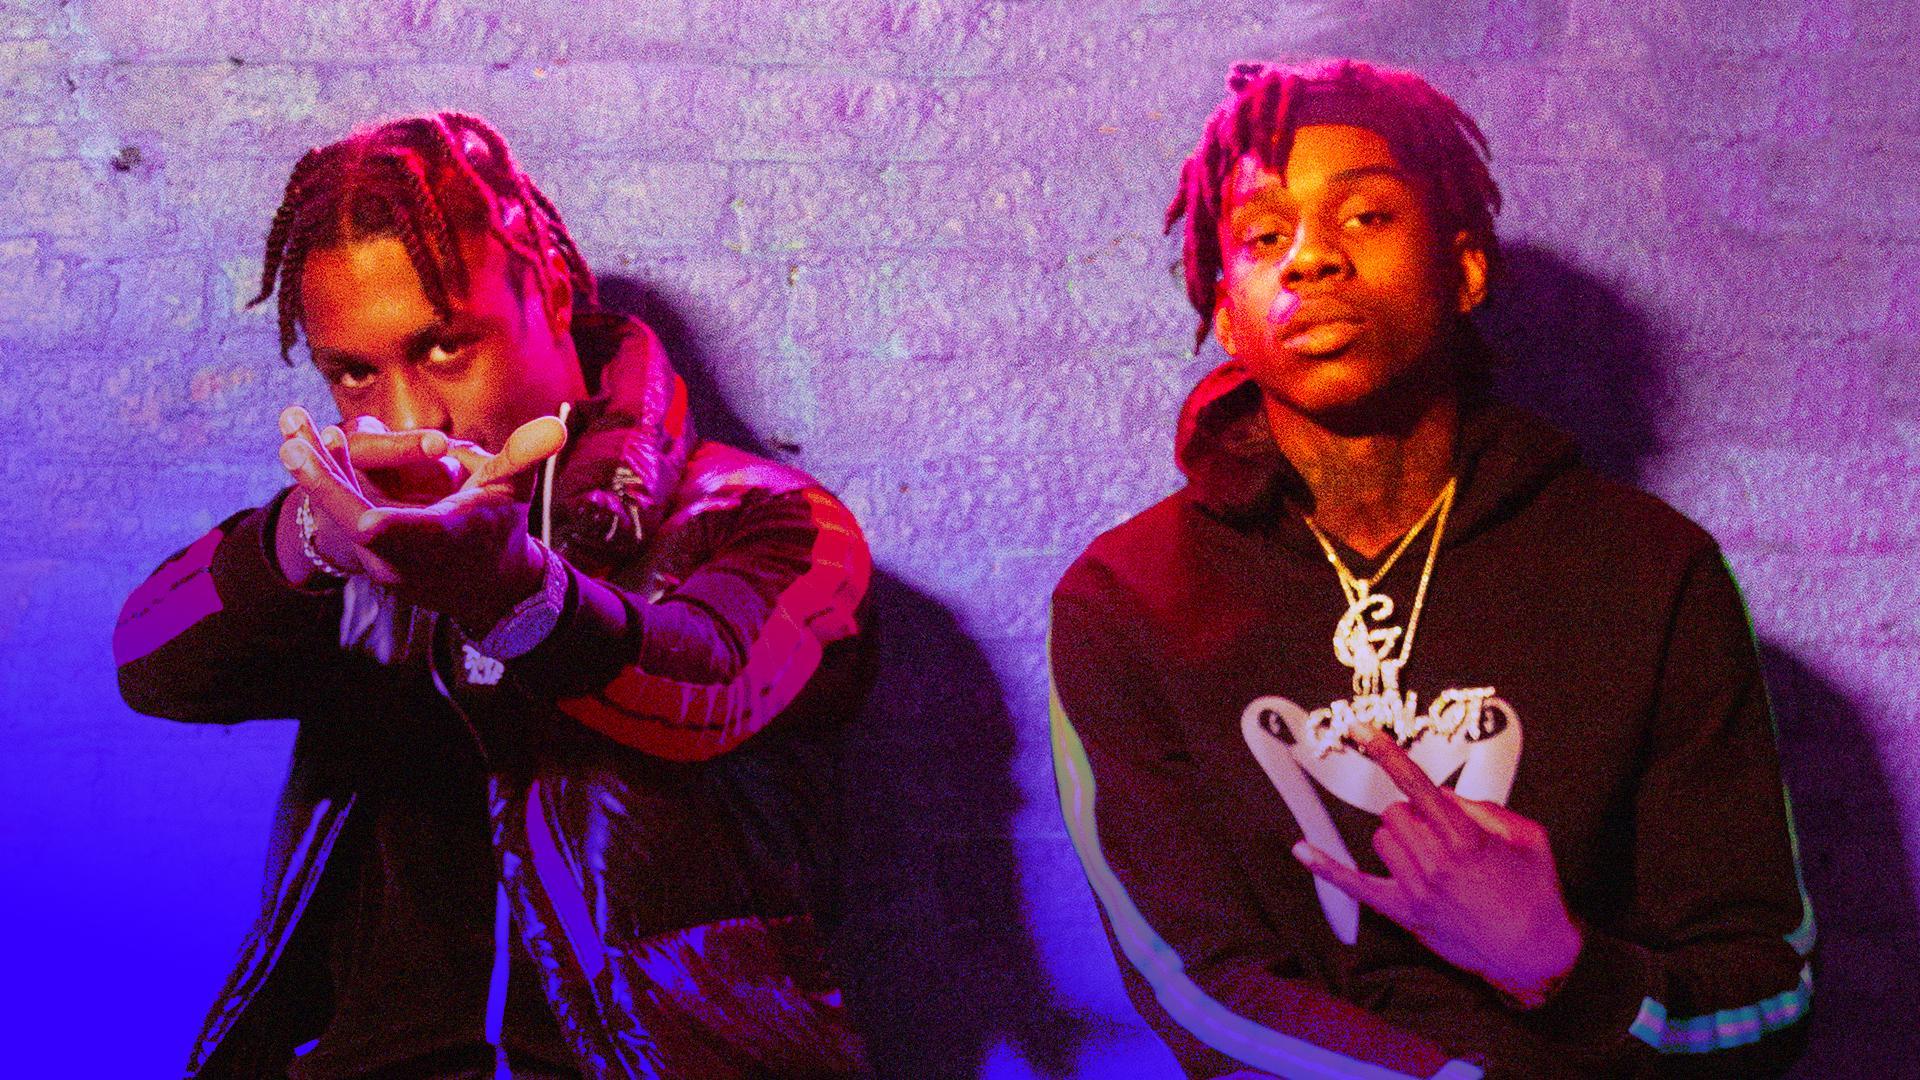 Polo G Feat. Lil Tjay Pop Out Wallpapers - Wallpaper Cave